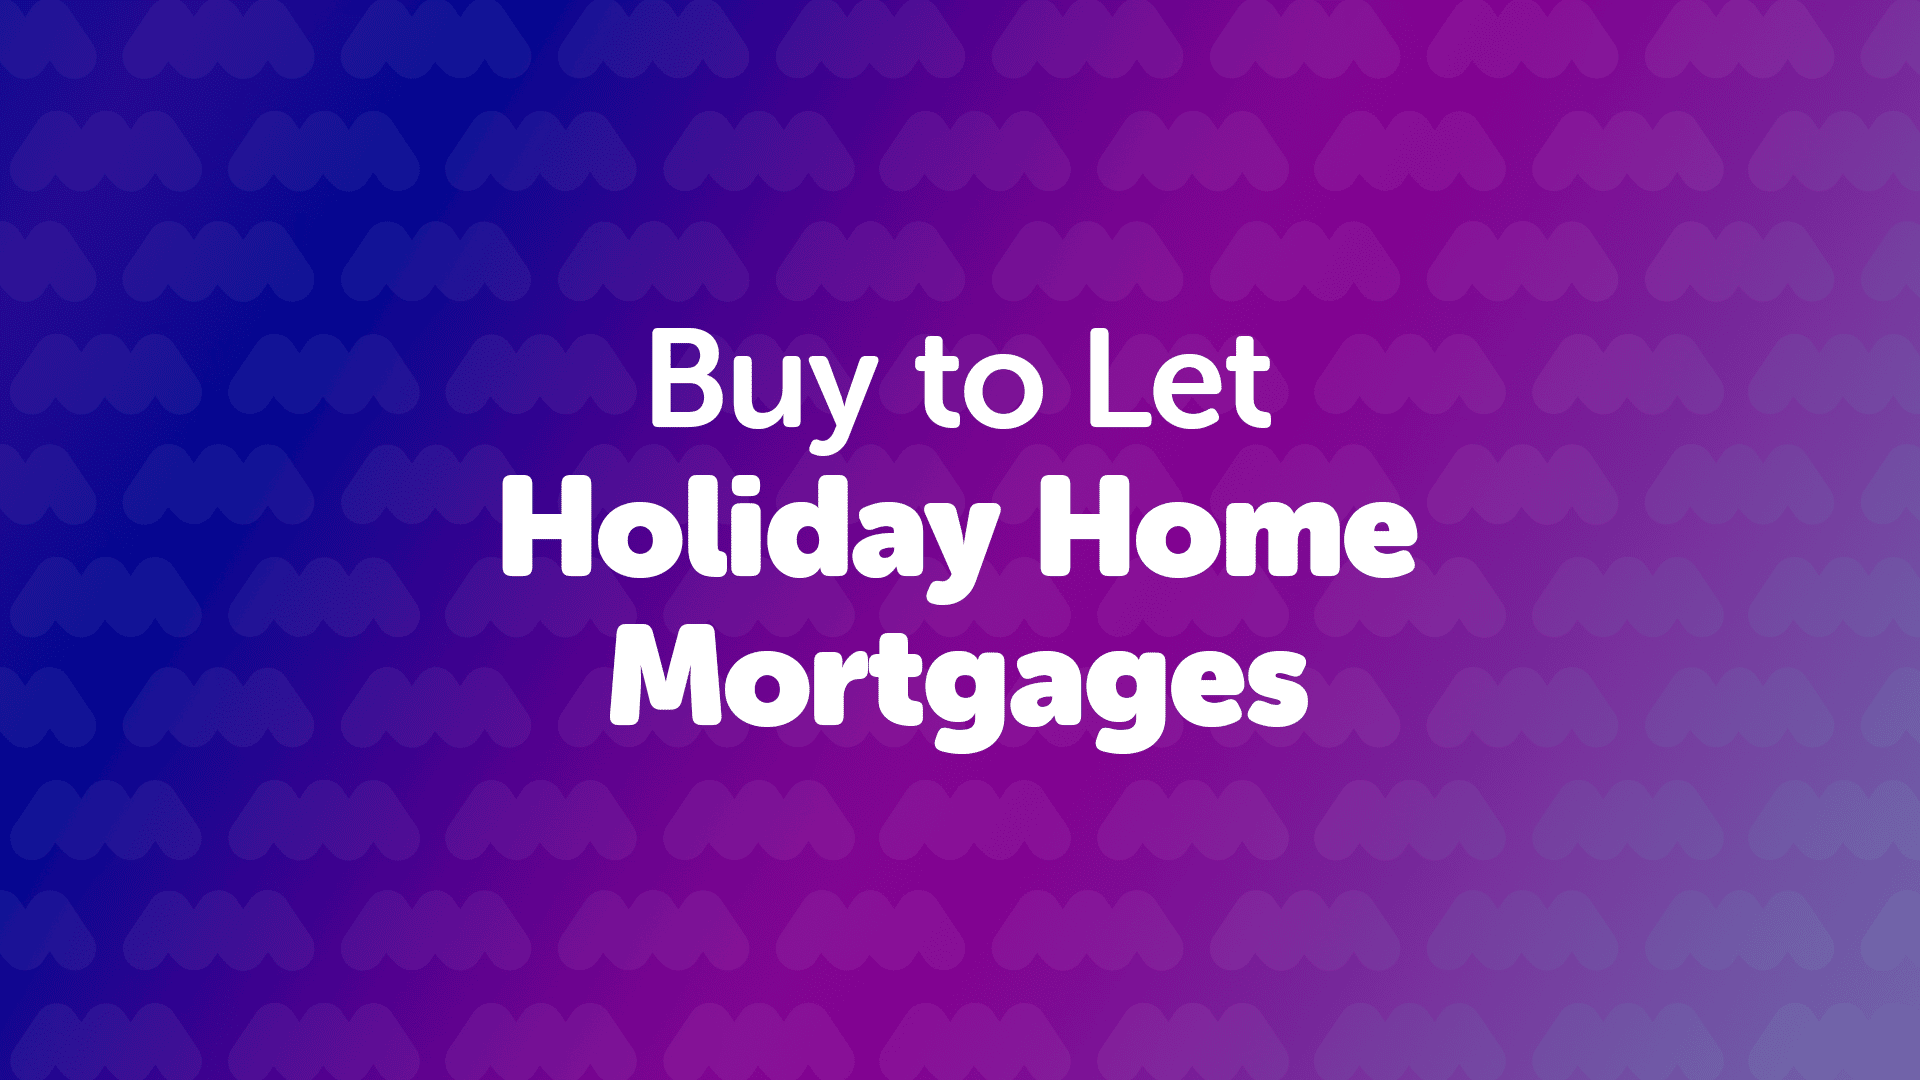 Buy to Let Holiday Home Mortgages in Hull